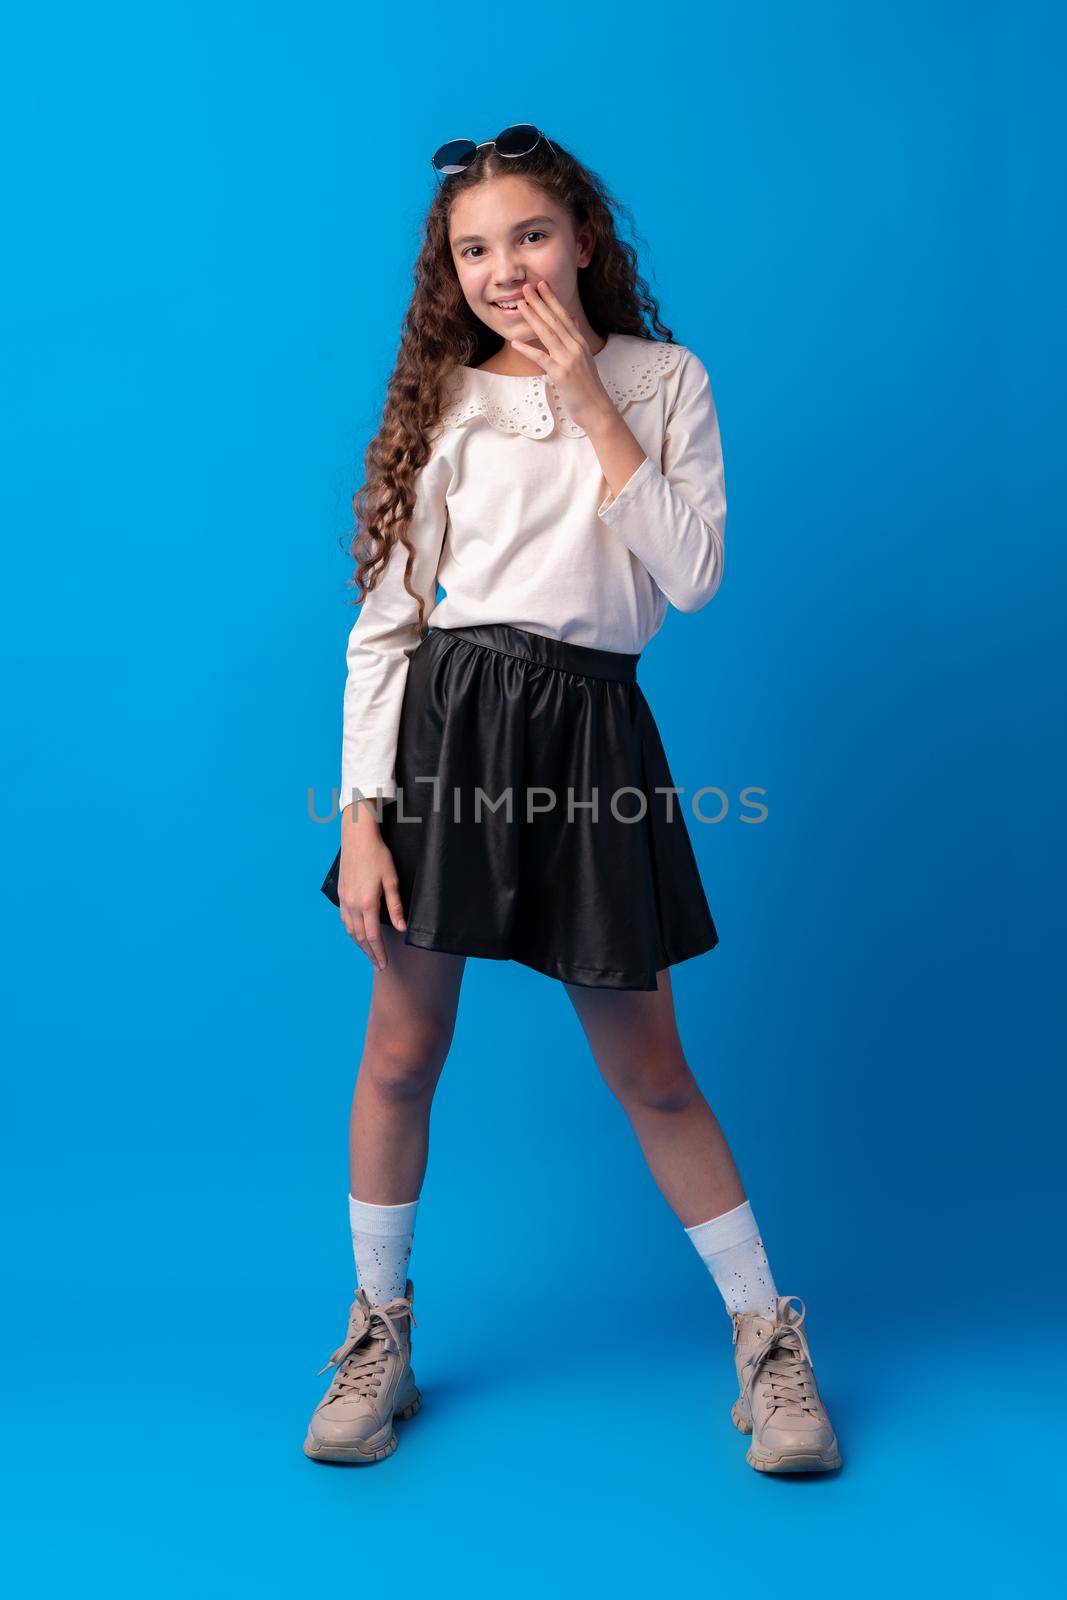 Shocked and surprised young teen girl against blue background, close up